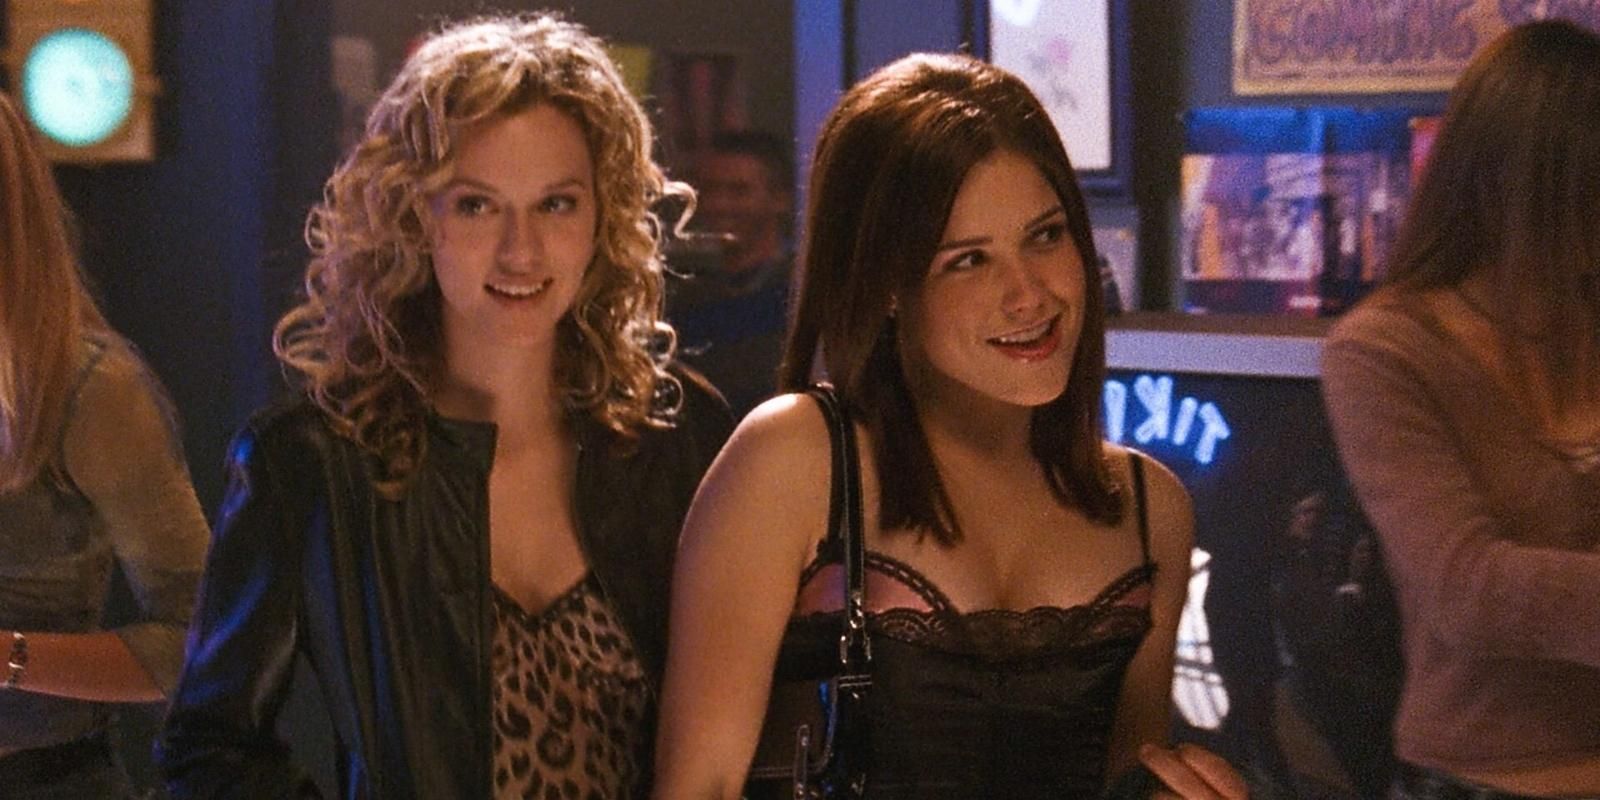 Peyton Sawyer and Brooke Davis at a college party in One Tree Hill